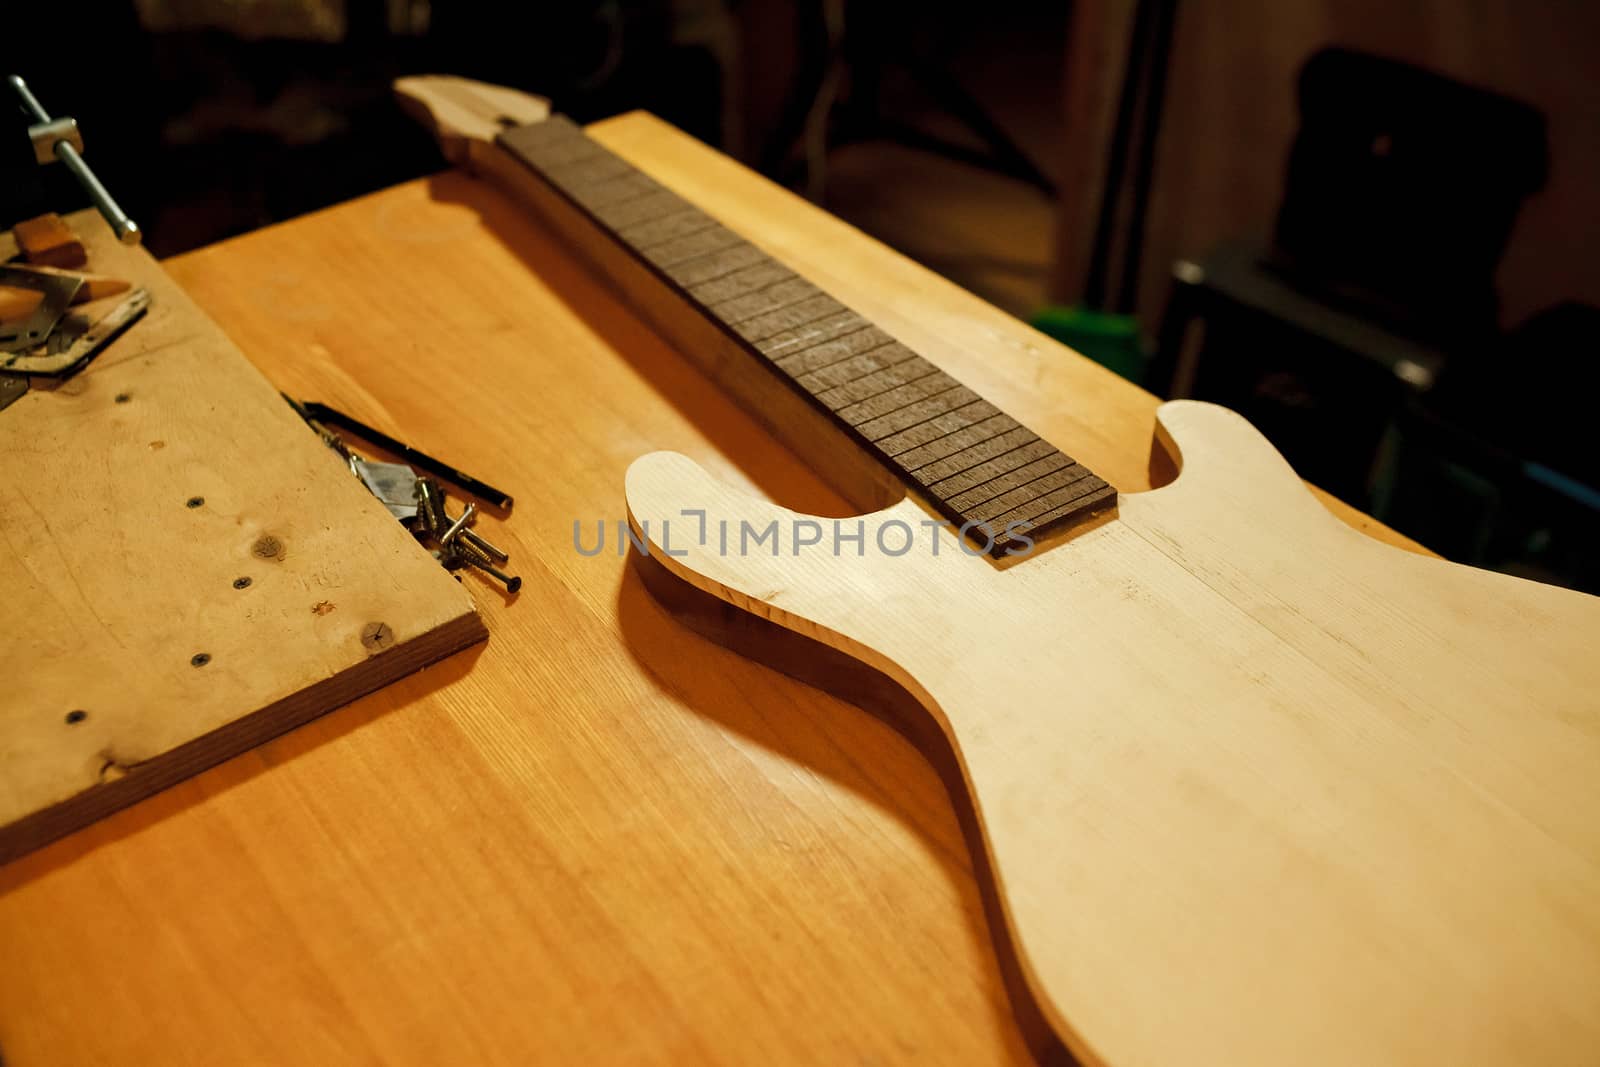 Billet of wood for bass guitar. Manufacture and repair musical instruments.  by Maynagashev